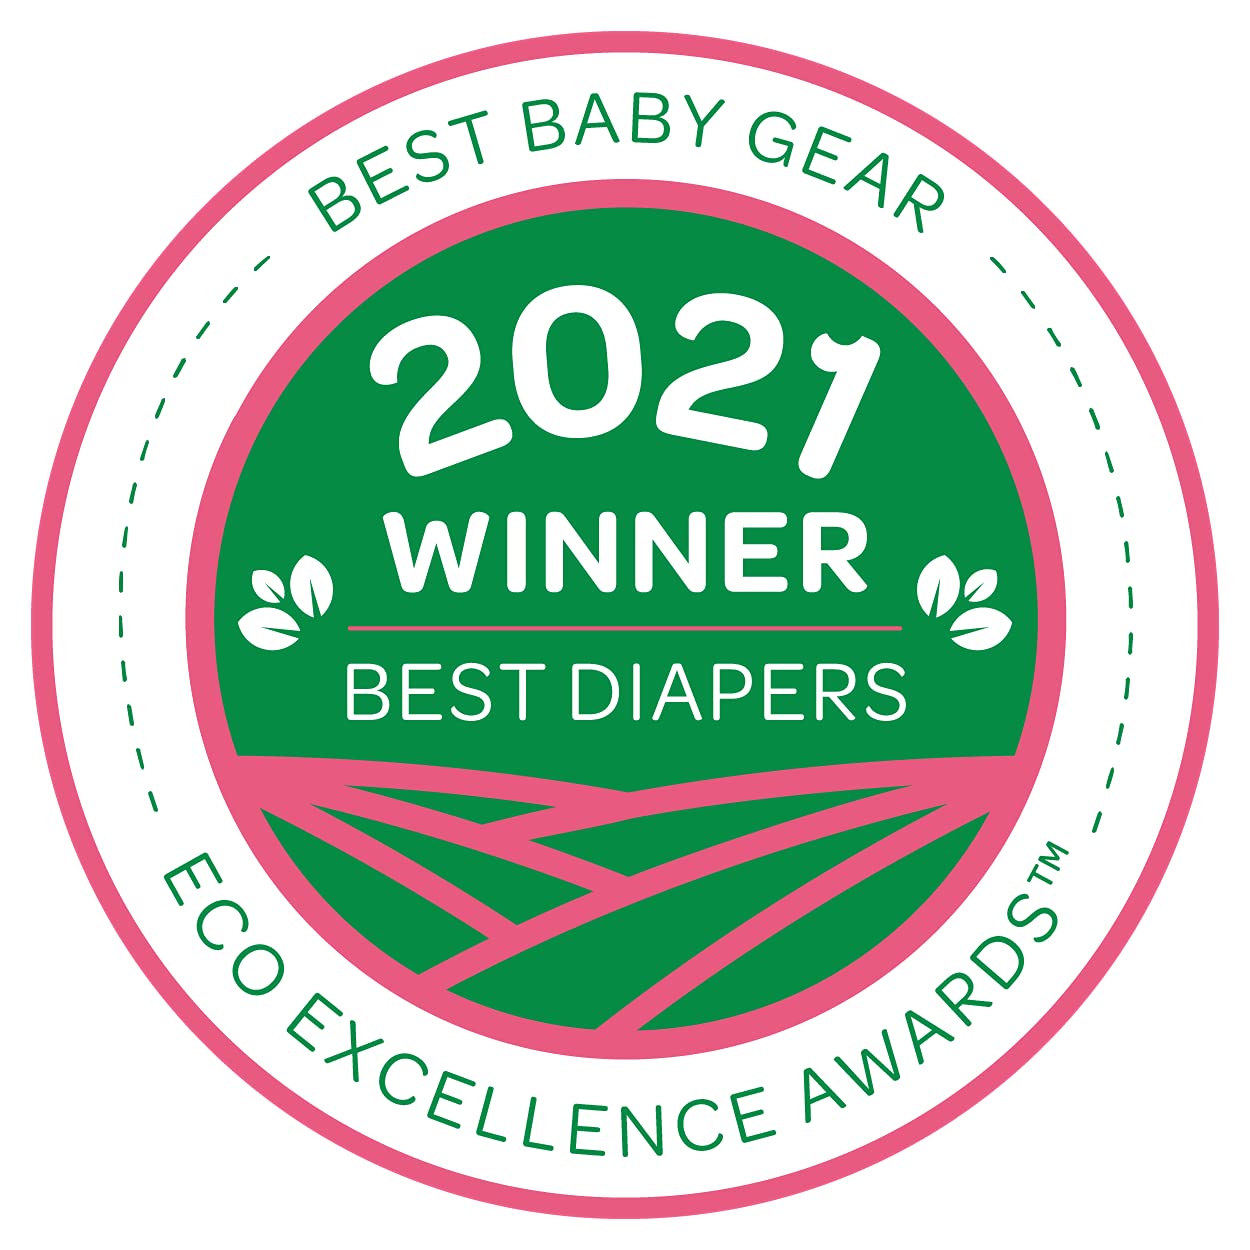 Bambo Nature Premium Eco-Friendly Baby Diapers (SIZES 1 TO 6 AVAILABLE), Size 2, 192 Count